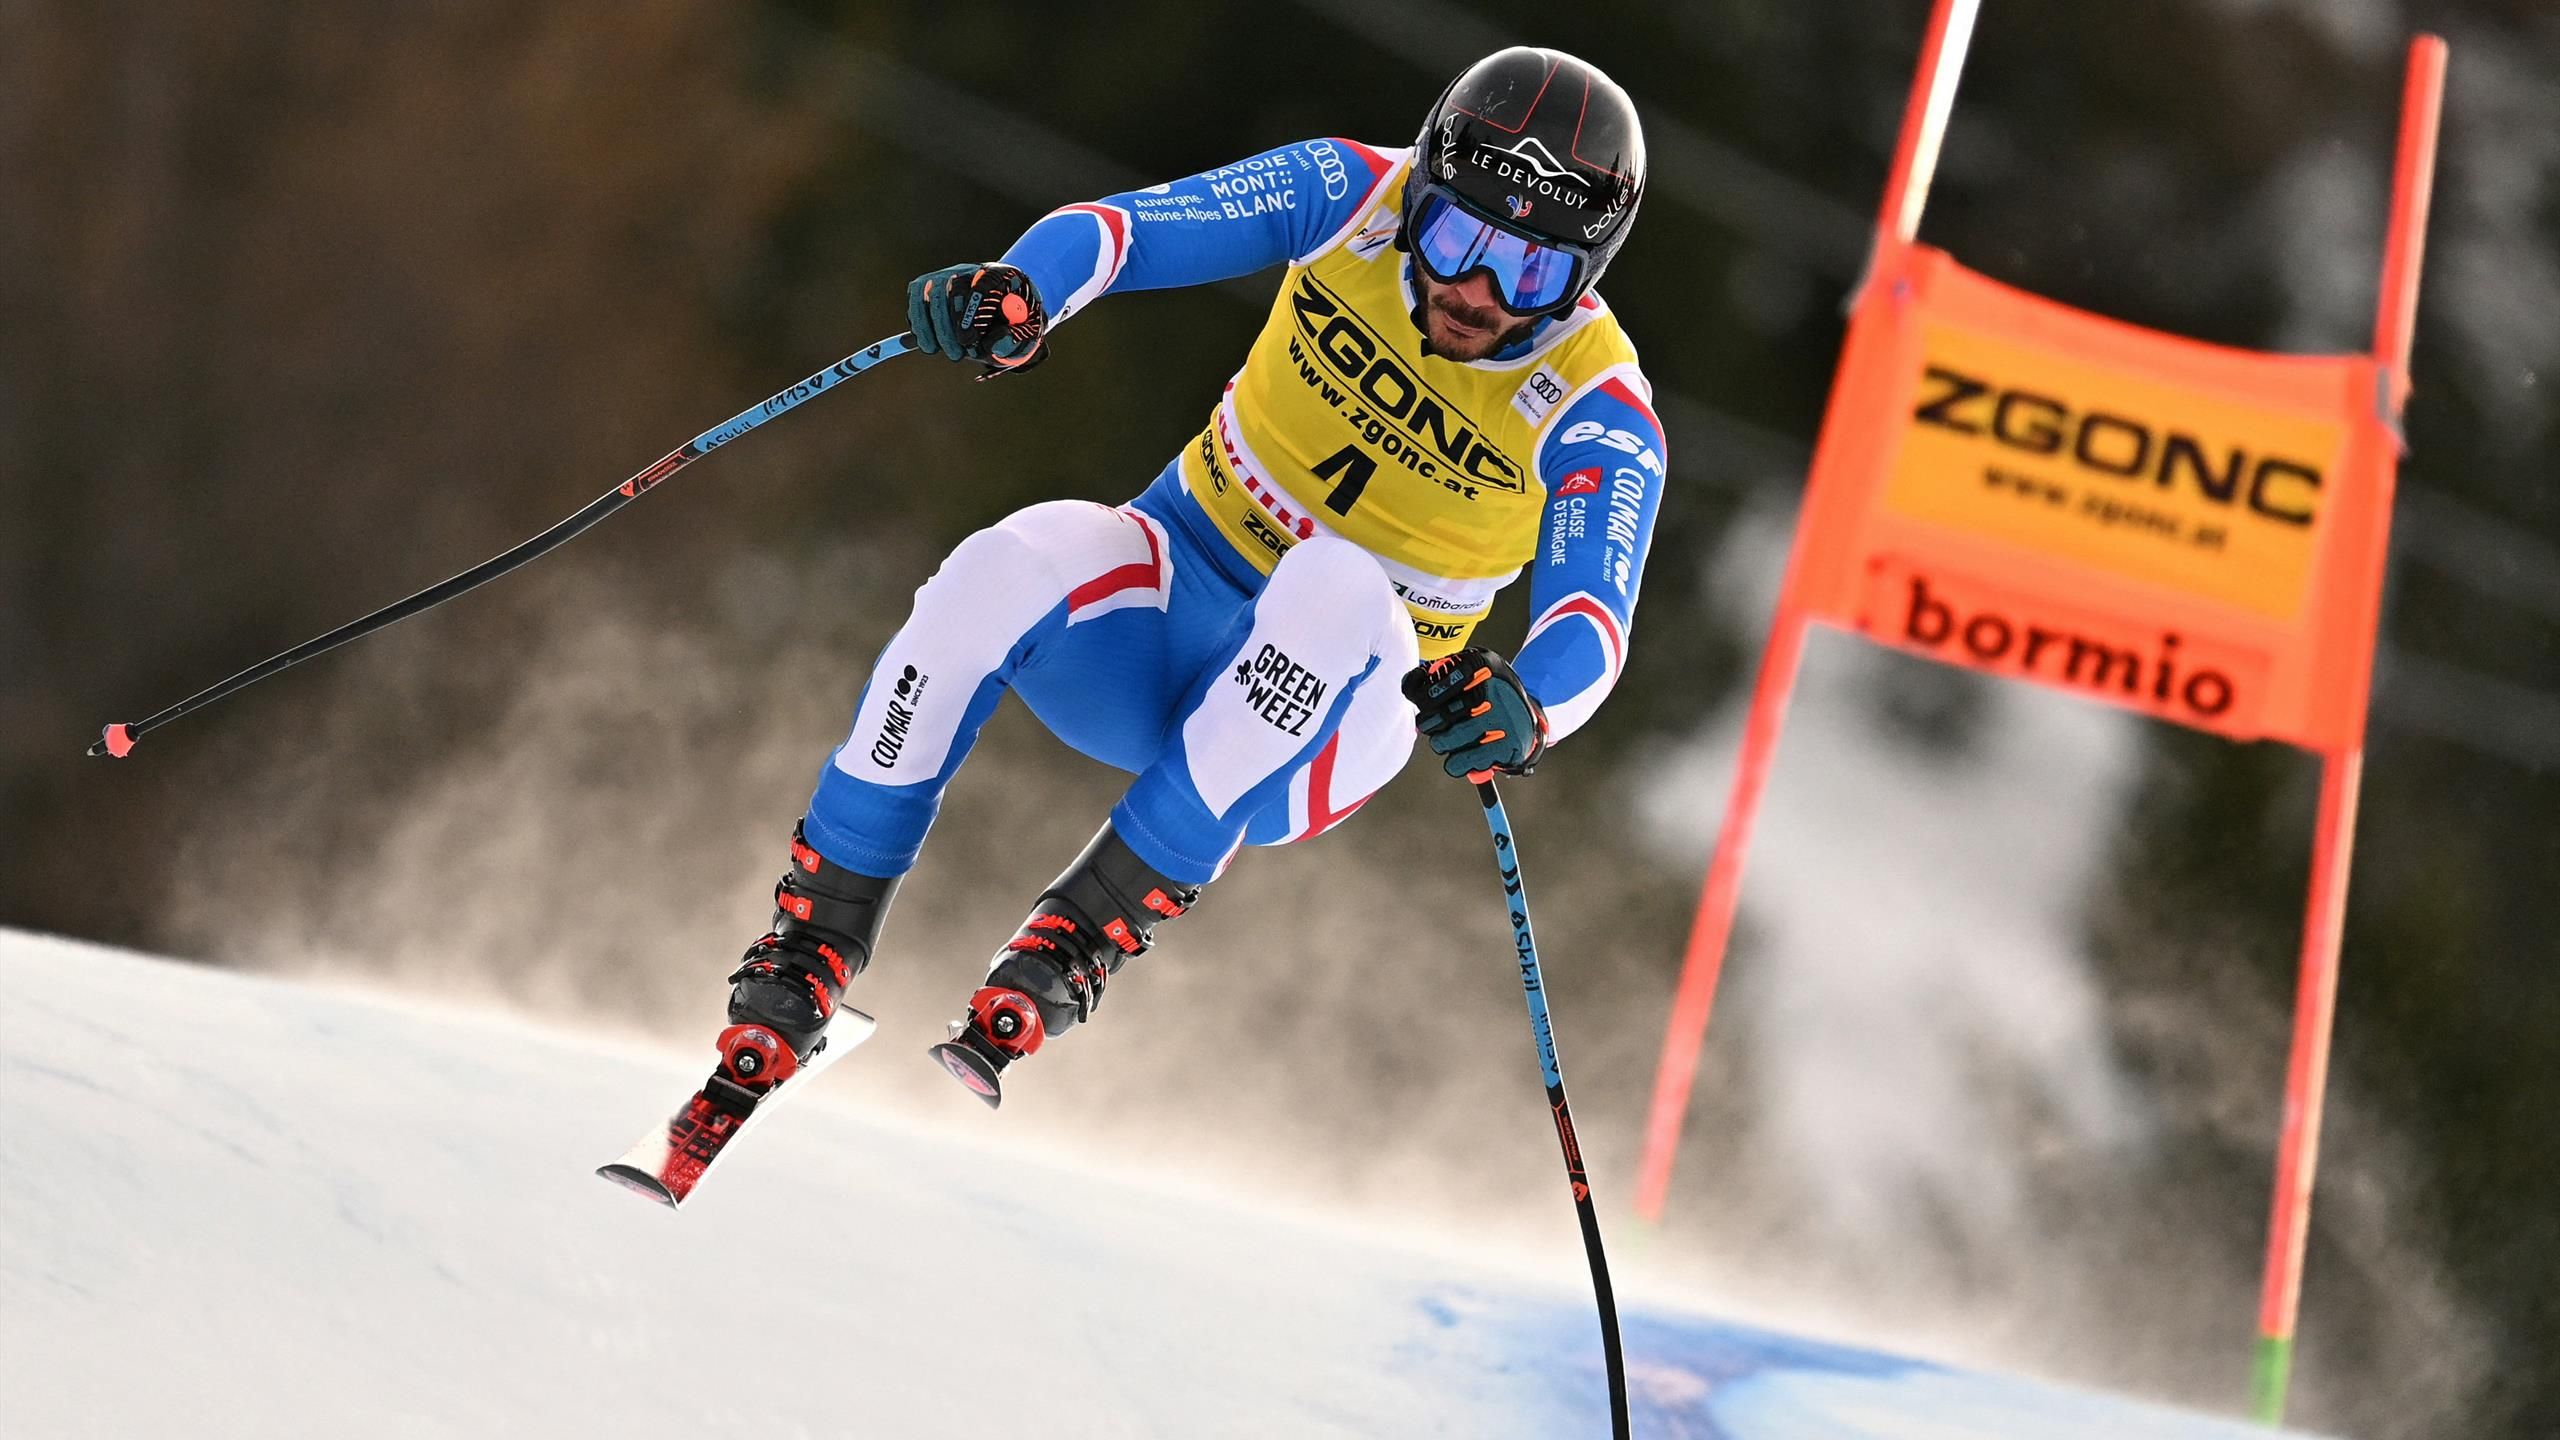 World Cup downhill in Bormio: Frenchman Cyprien Sarrazin beats the favorites on the Stelvio – falls into the classic